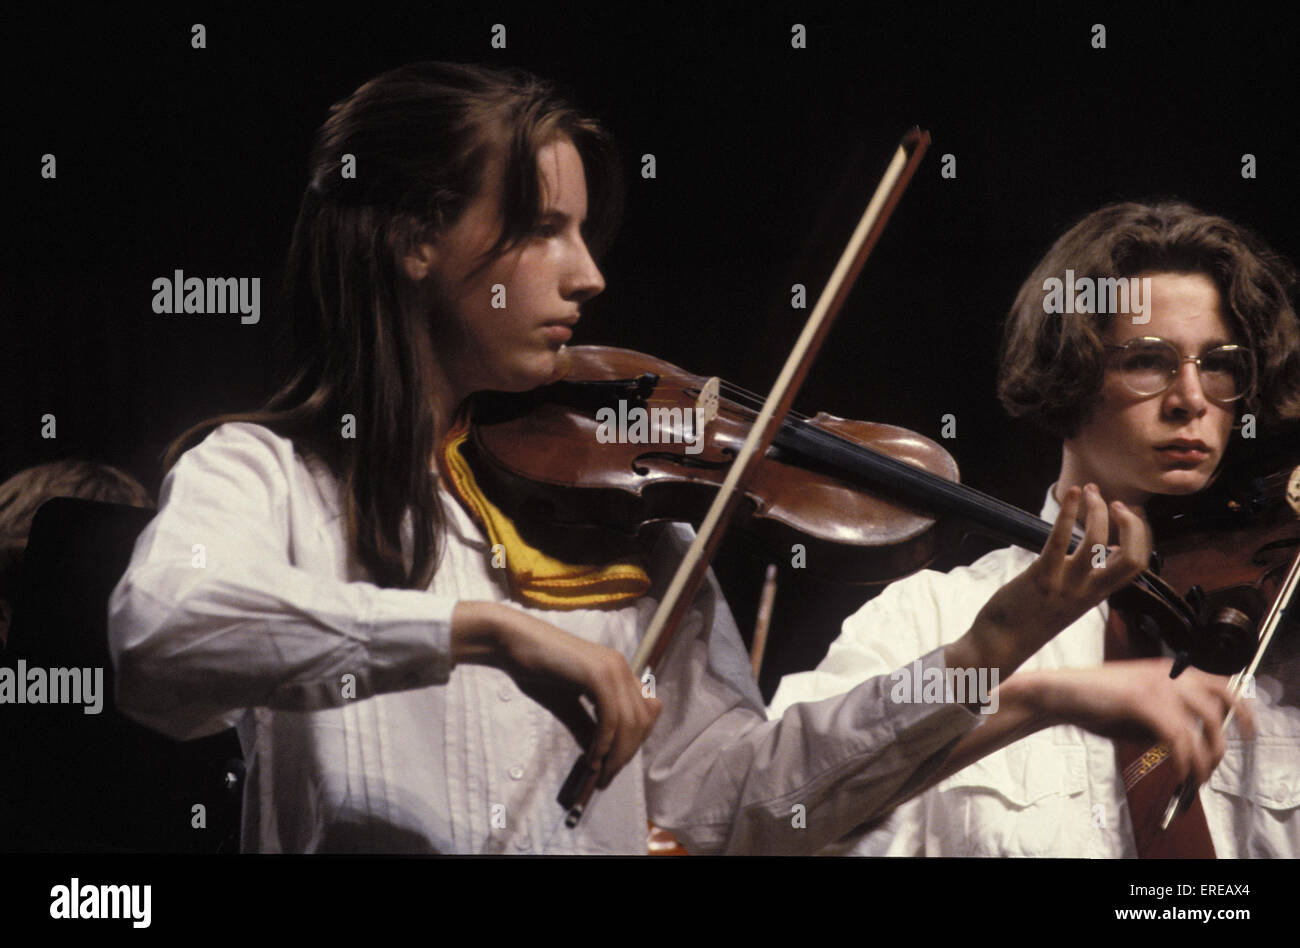 Girls playing violin with bow in youth orchestra Stock Photo